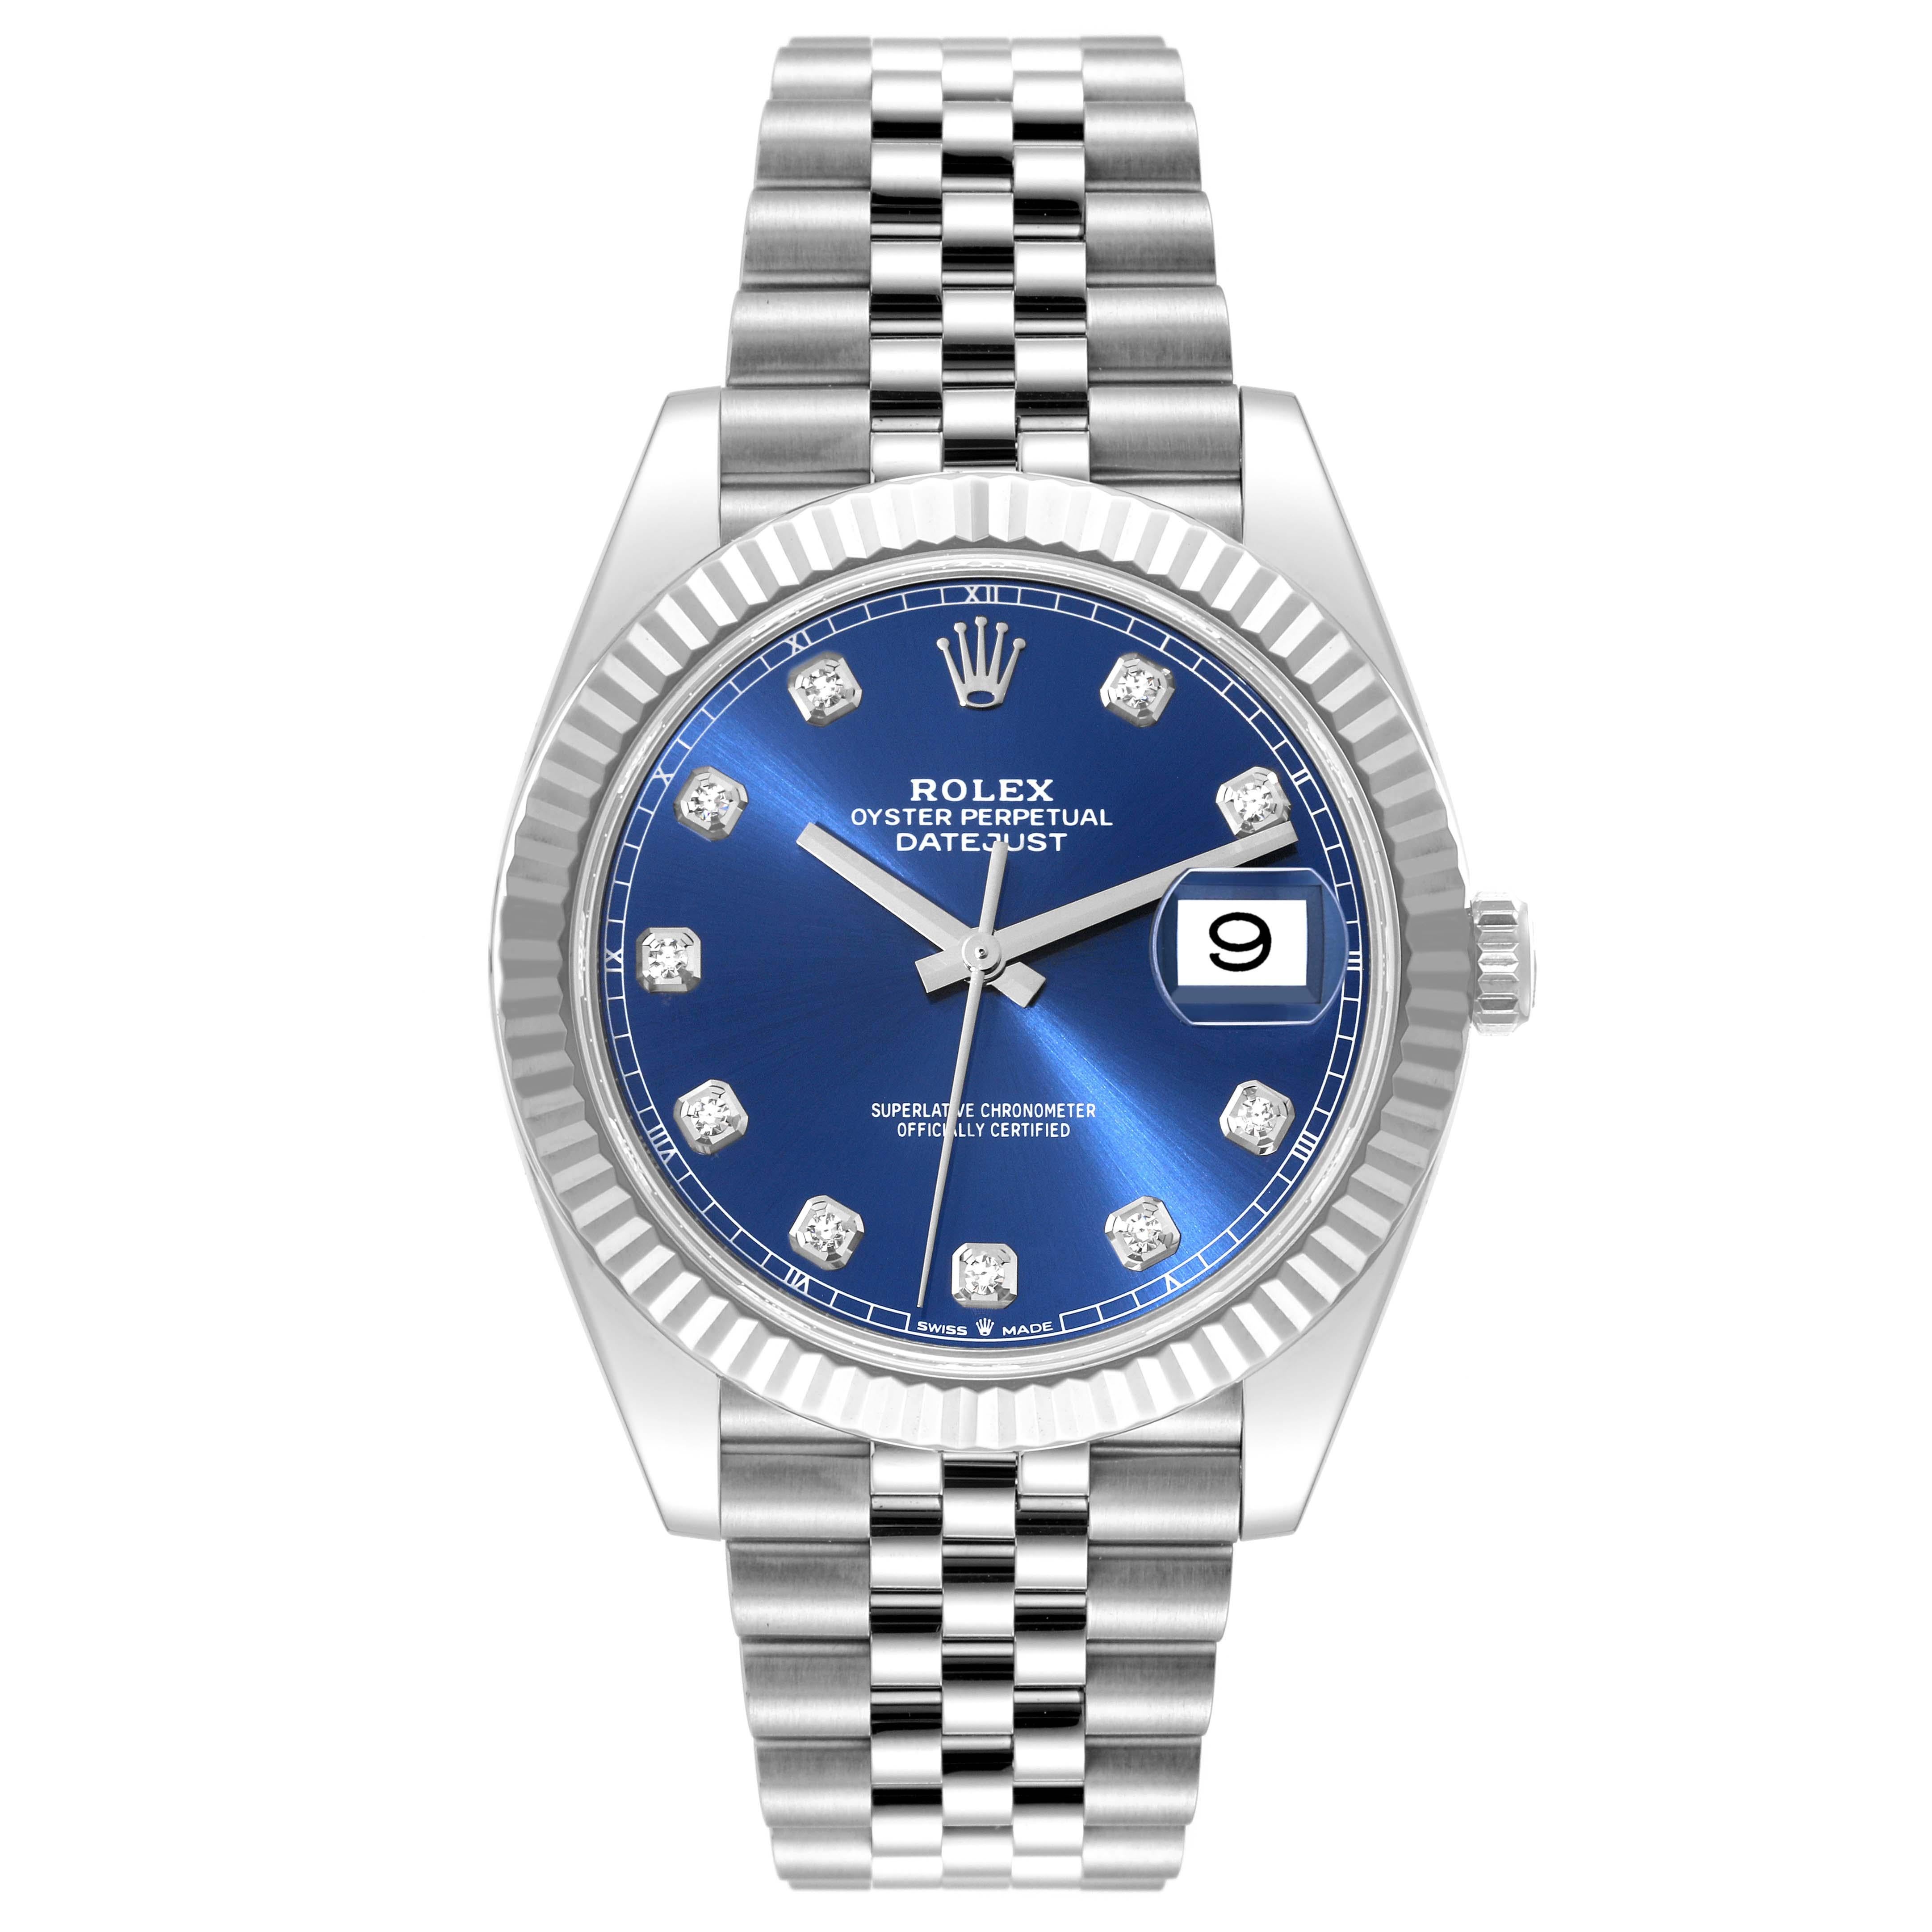 Rolex Datejust 41 Blue Diamond Dial Steel White Gold Mens Watch 126334. Officially certified chronometer automatic self-winding movement. Stainless steel case 41 mm in diameter. Rolex logo on a crown. 18K white gold fluted bezel. Scratch resistant